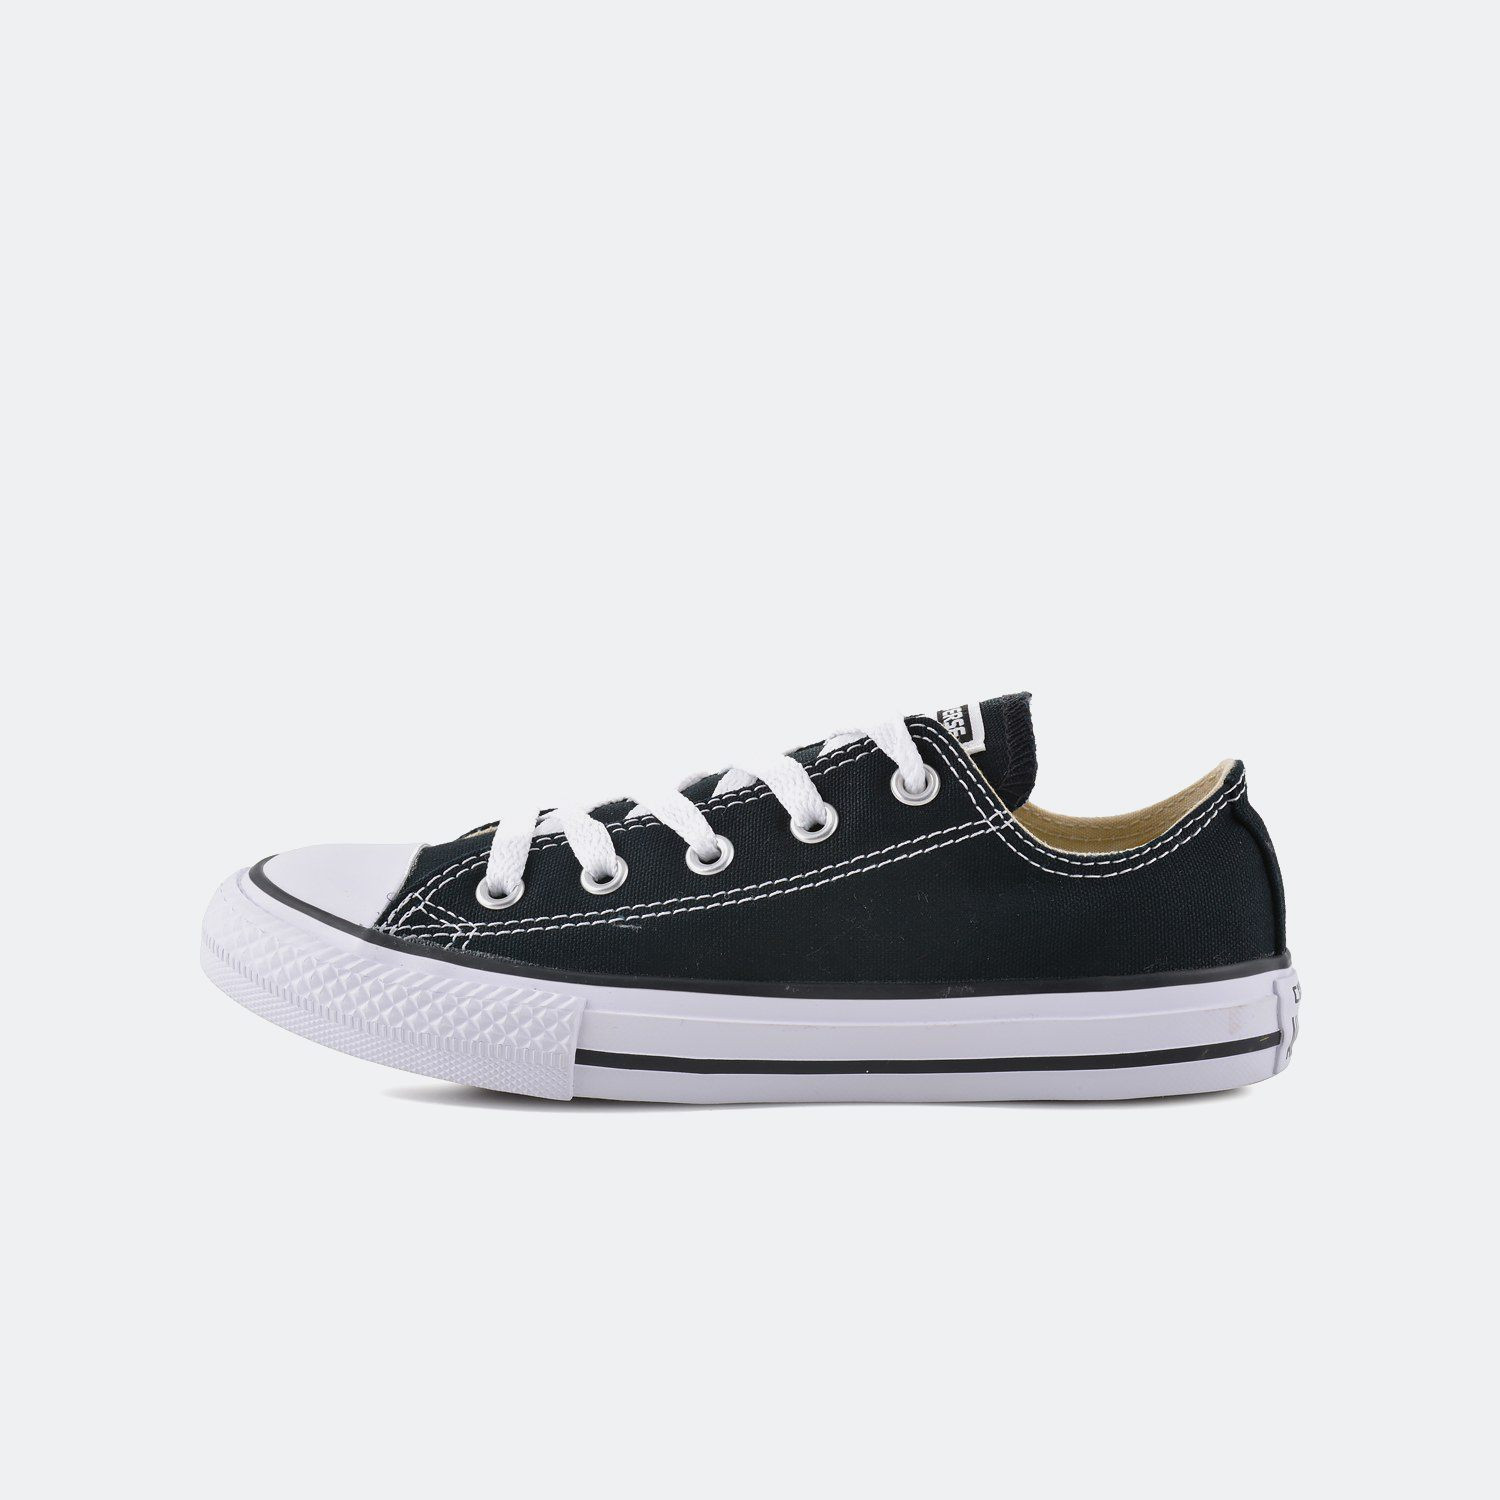 Converse Chuck Taylor All Star Ox Παιδικά Παπούτσια (10800302587_1469)